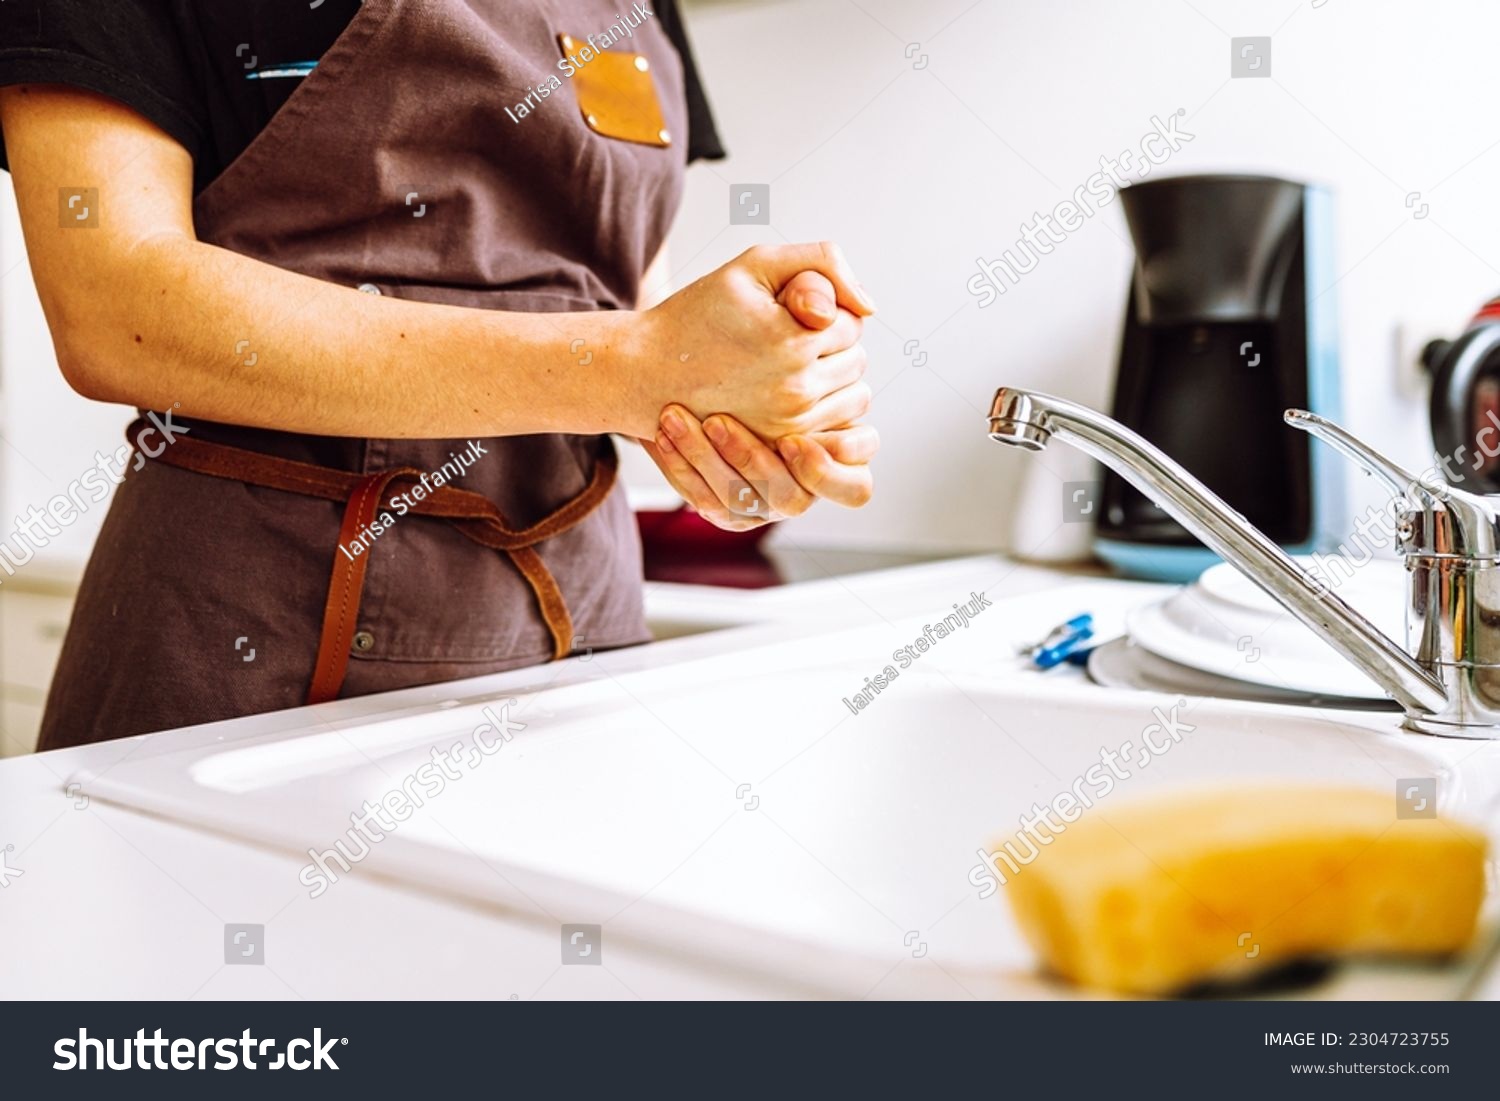 female slender figure in chef's work apron stands near kitchen sink, hands housewife dishwasher after washing dishes #2304723755